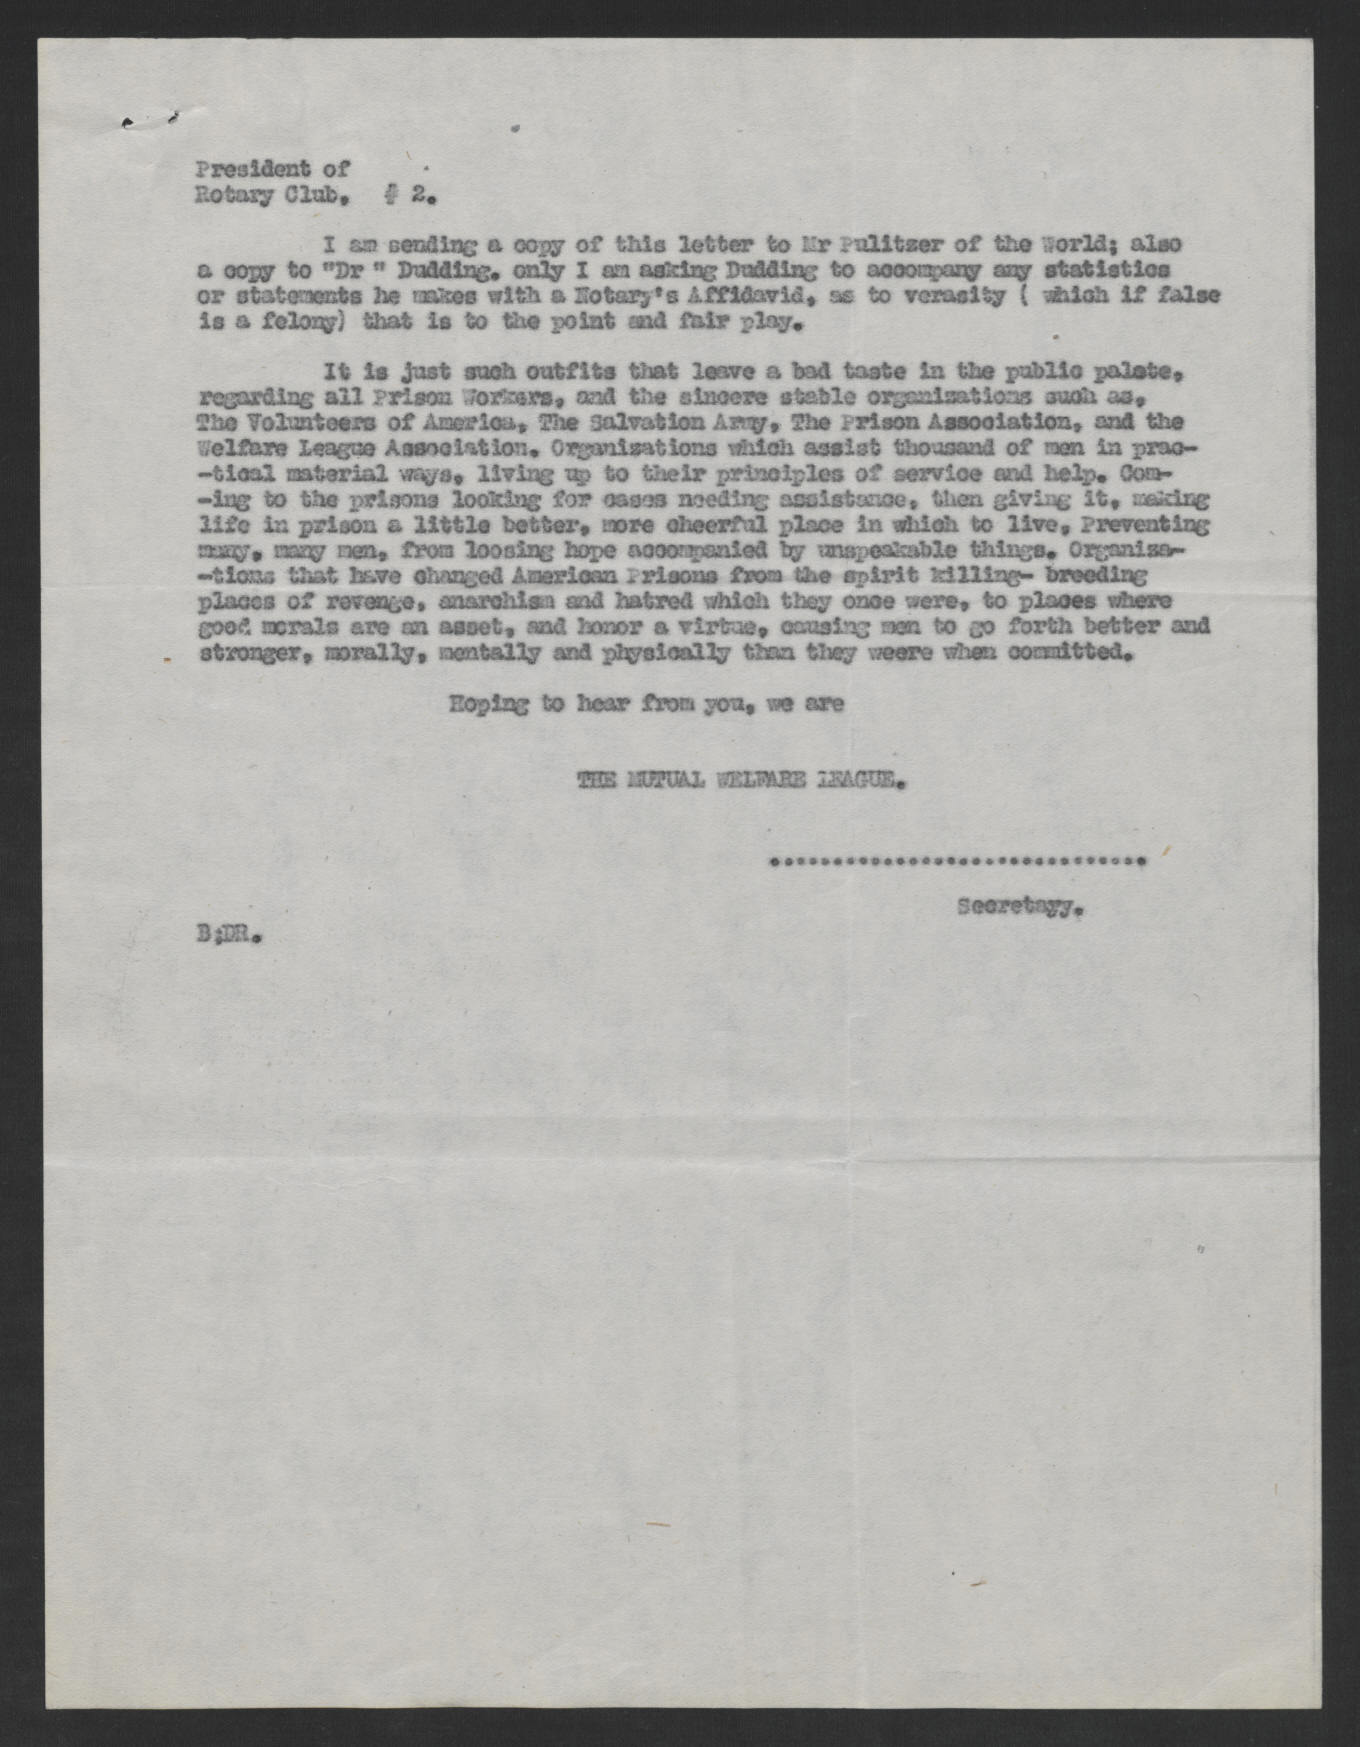 Mutual Welfare League to the President of the NYC Rotary Club, May 25, 1920, page 2